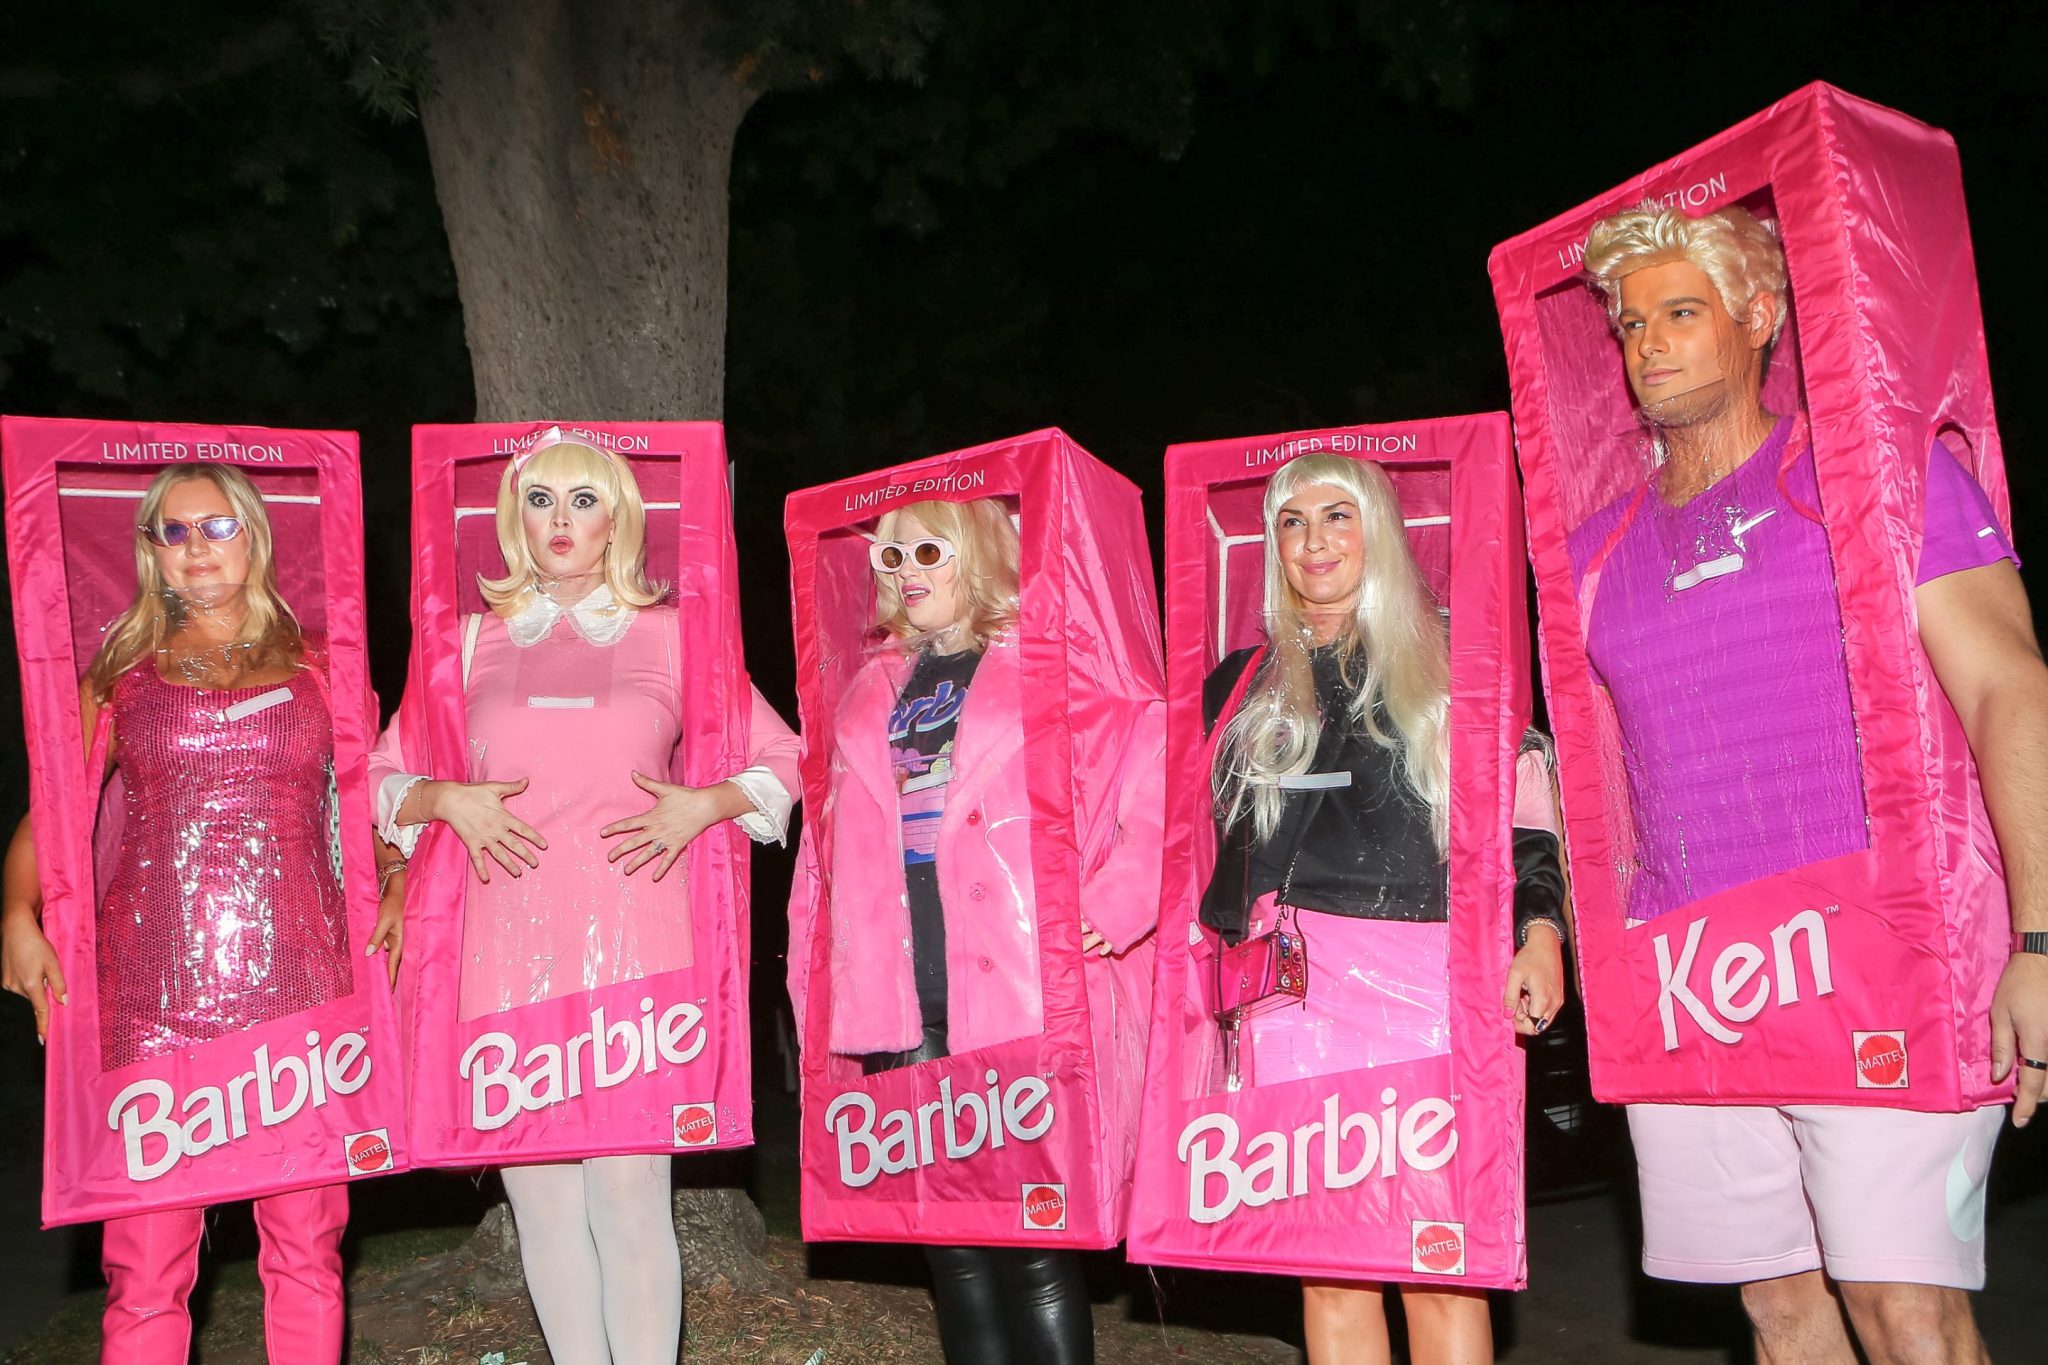 Barbie’s recent hit movie means everyone will be wearing pink this Halloween